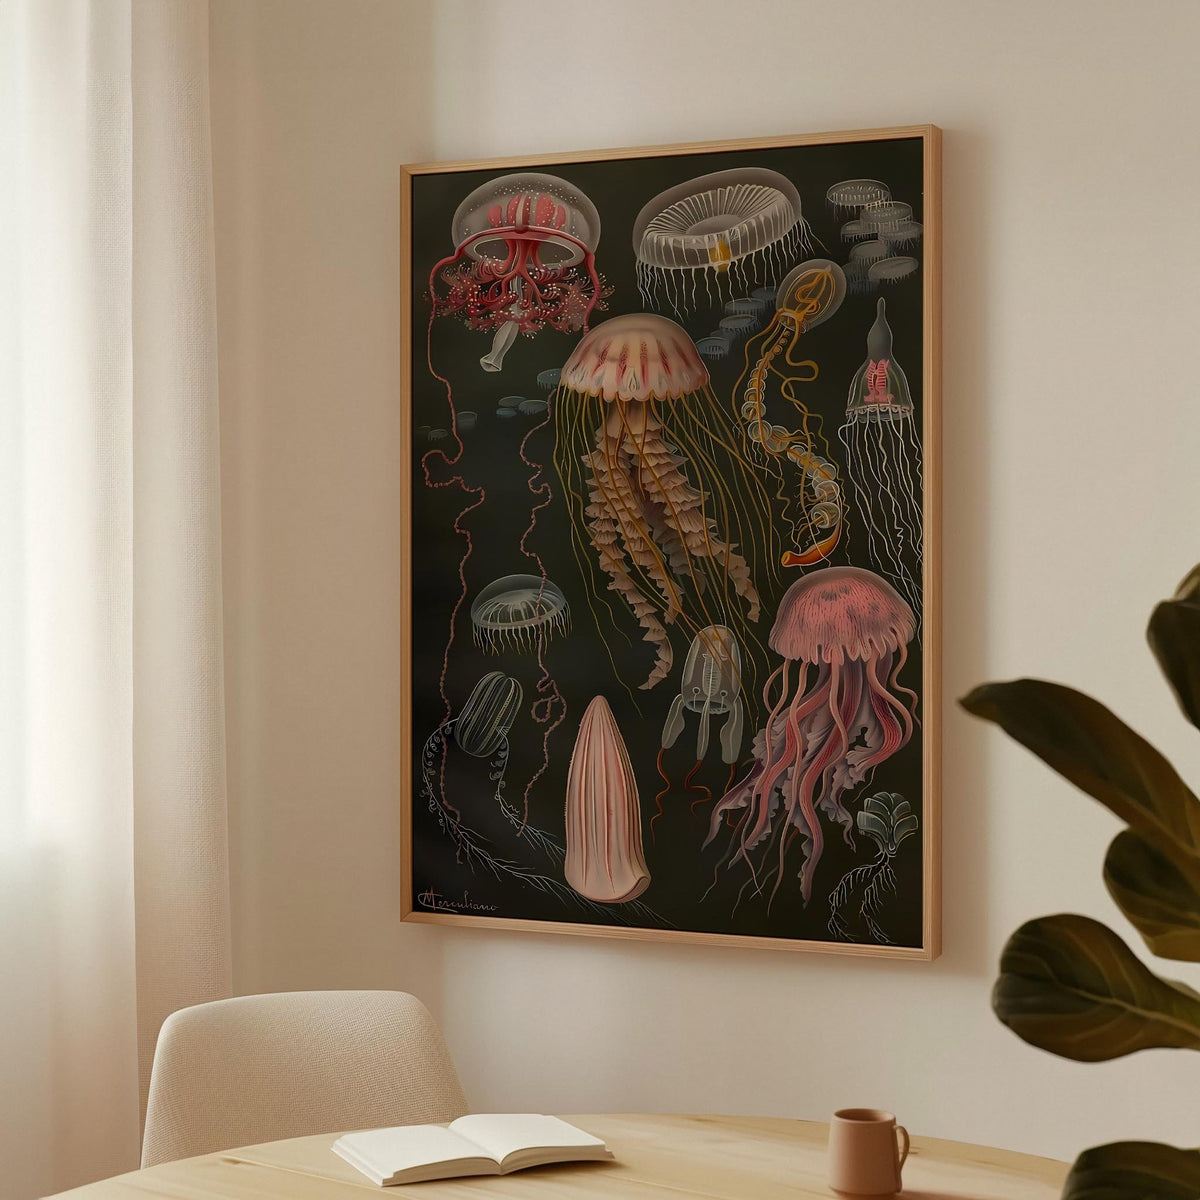 a painting of jellyfish and other sea creatures hangs on a wall